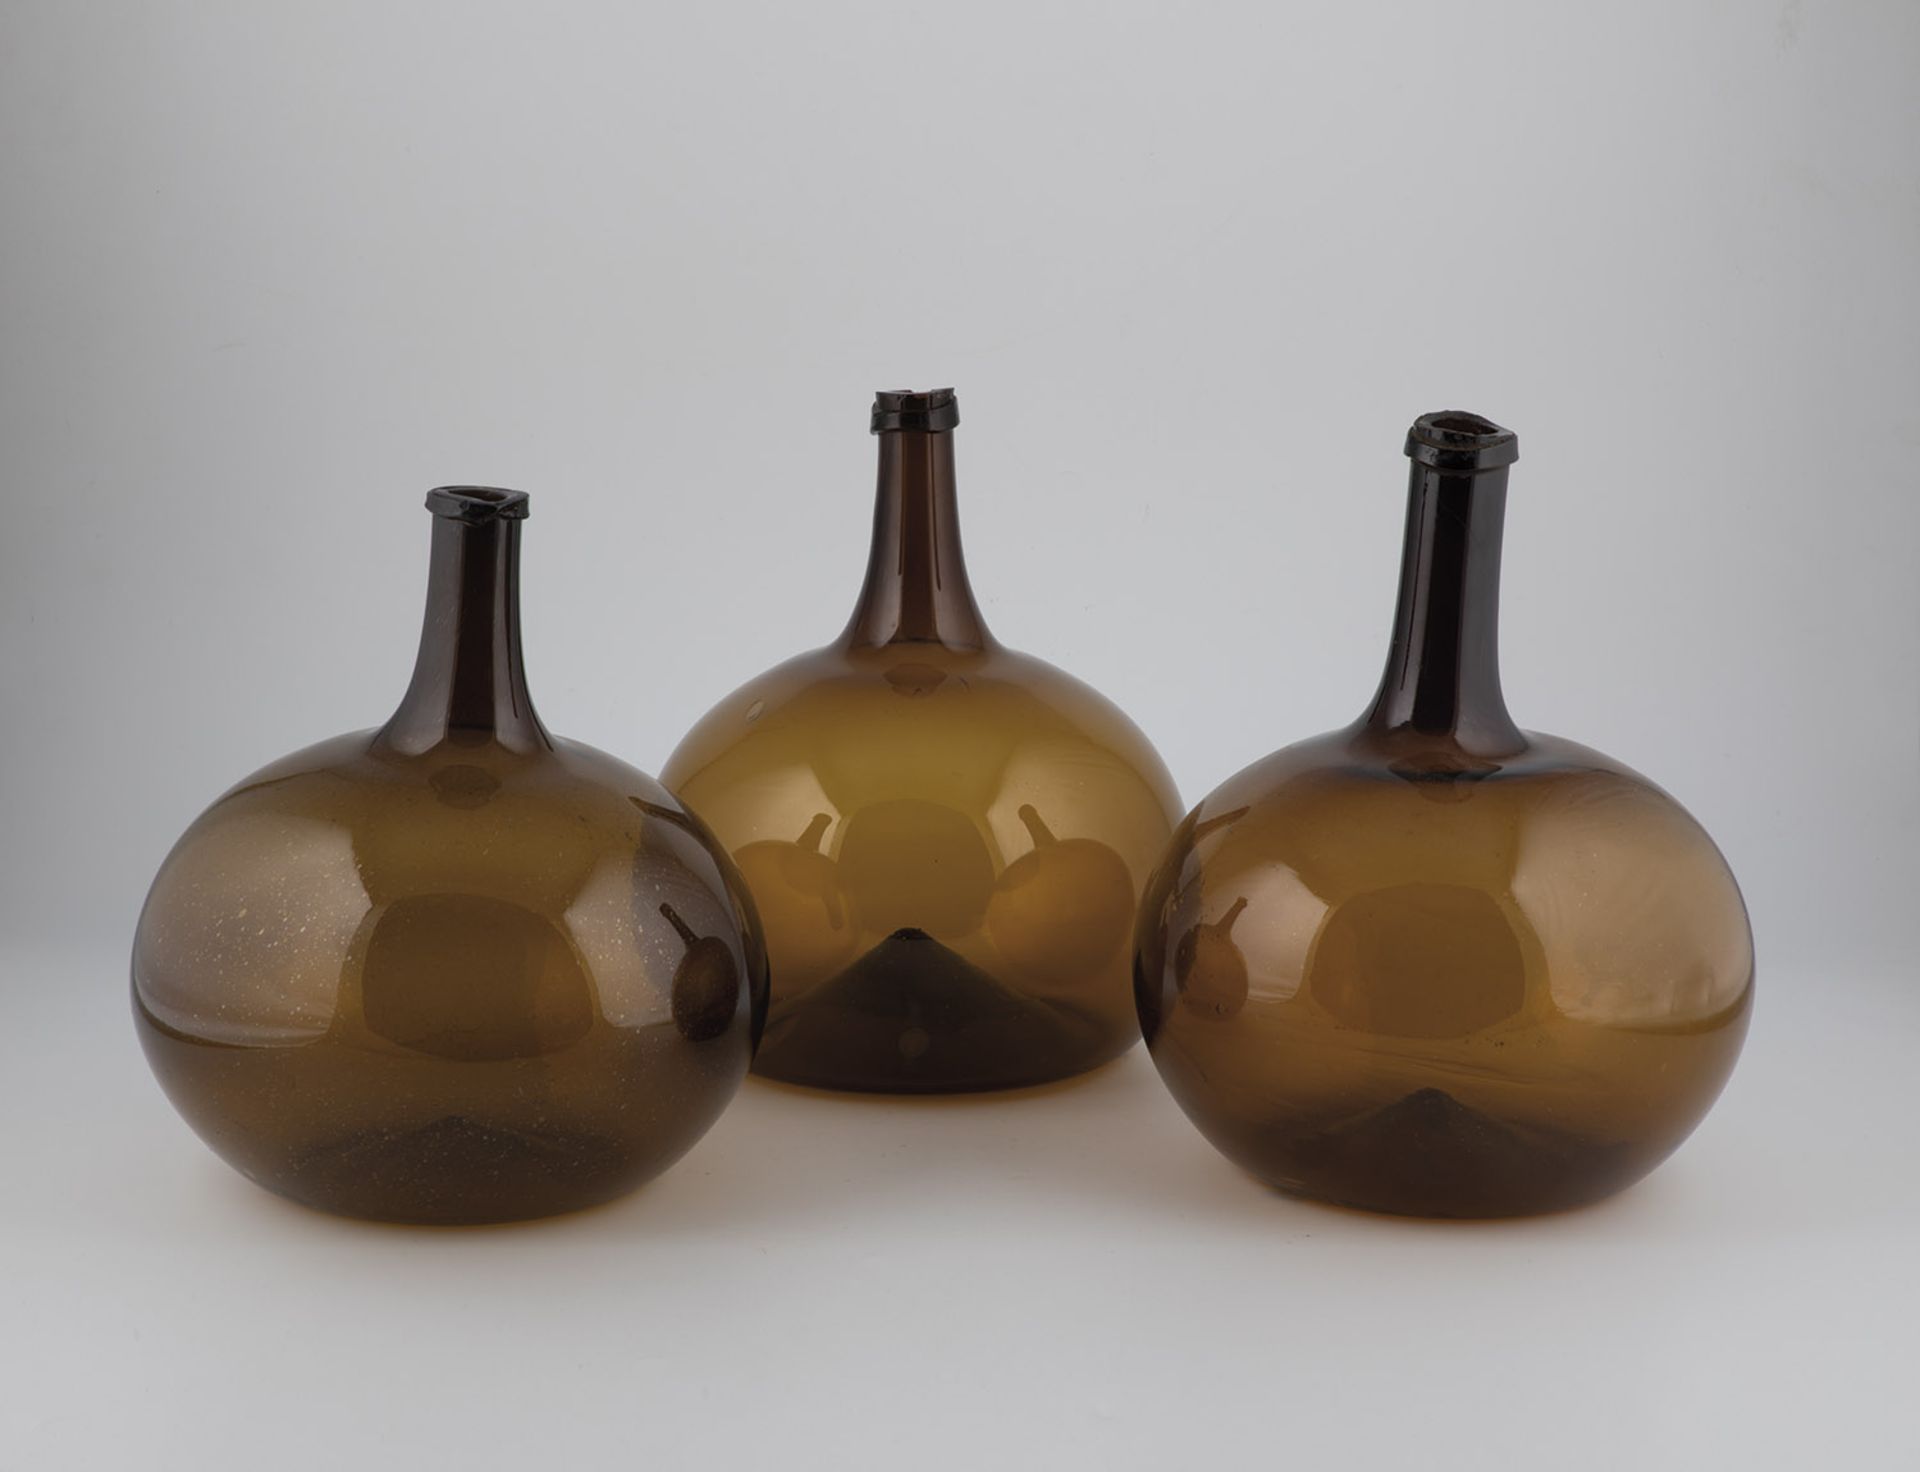 Three large spherical bottles from Alsace, 19th century Brown, partly bubbled glass. Slightly